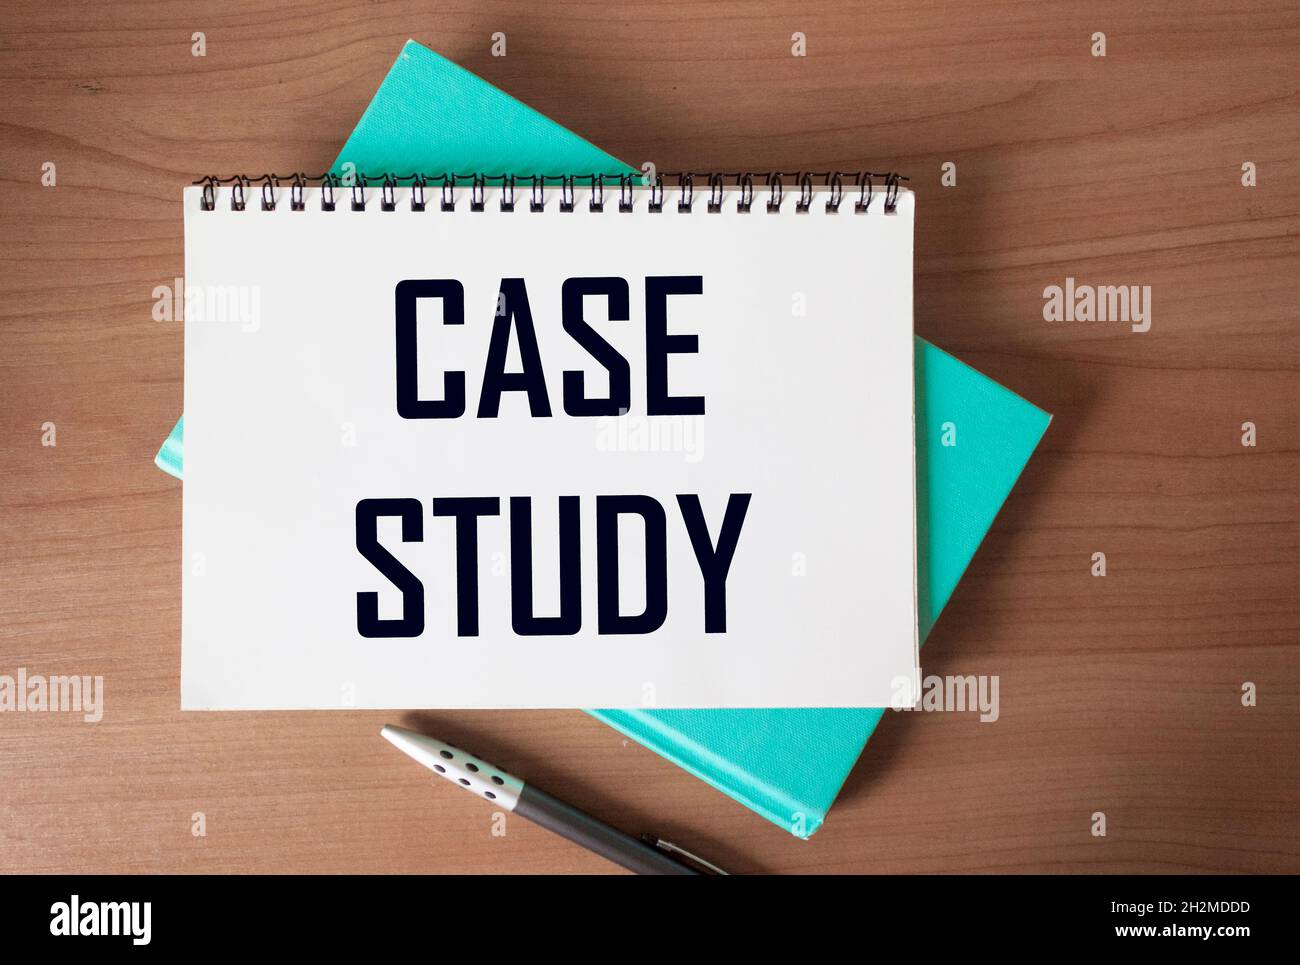 The text Case study is written on a notebook and a wooden table Stock Photo